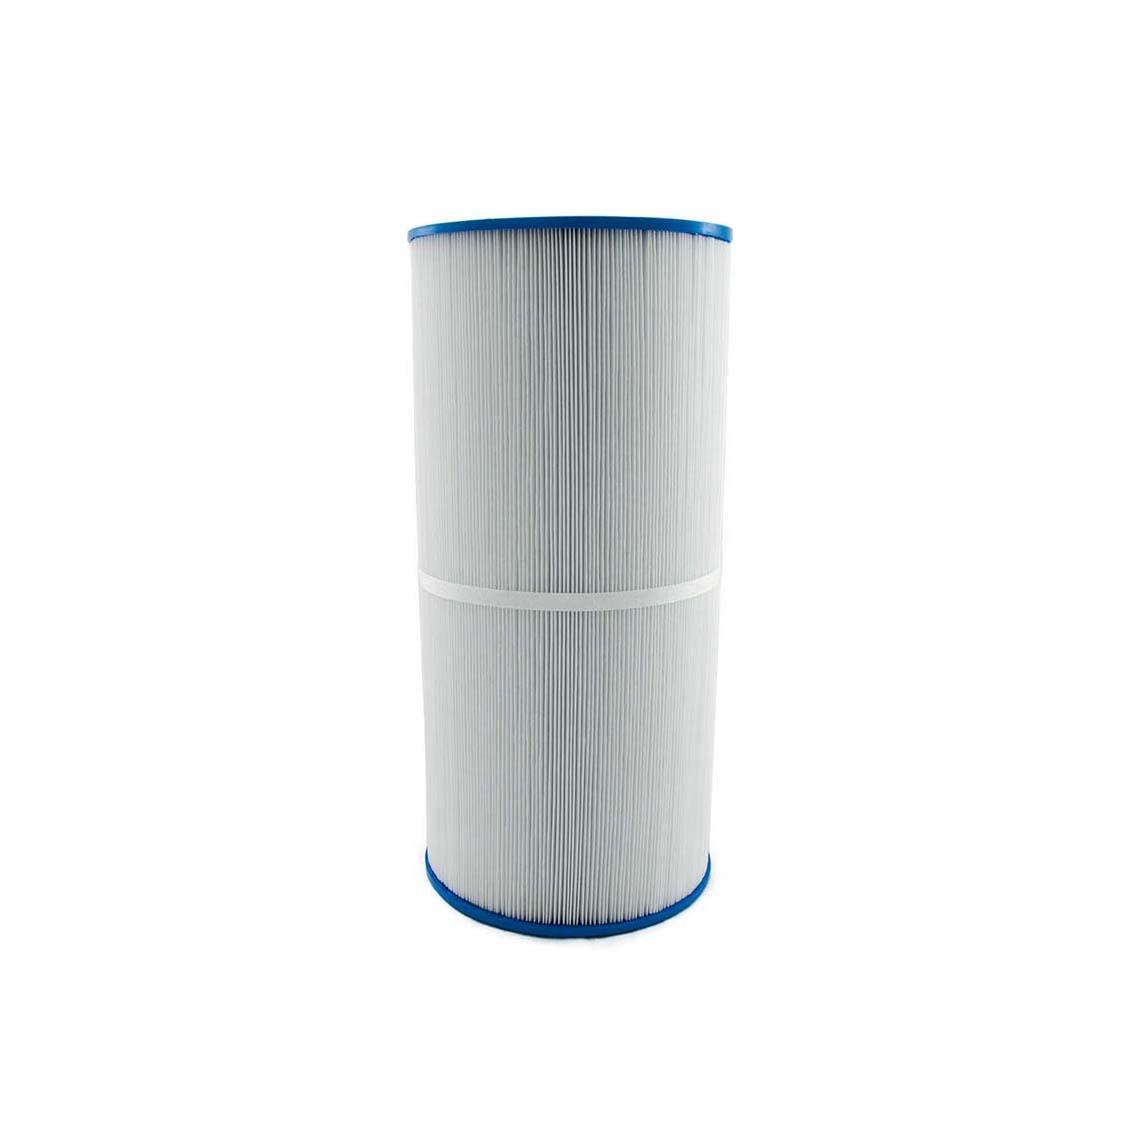 Product main image -  Hurlcon ZX150 Replacement Filter Cartridge - 150 sqft 